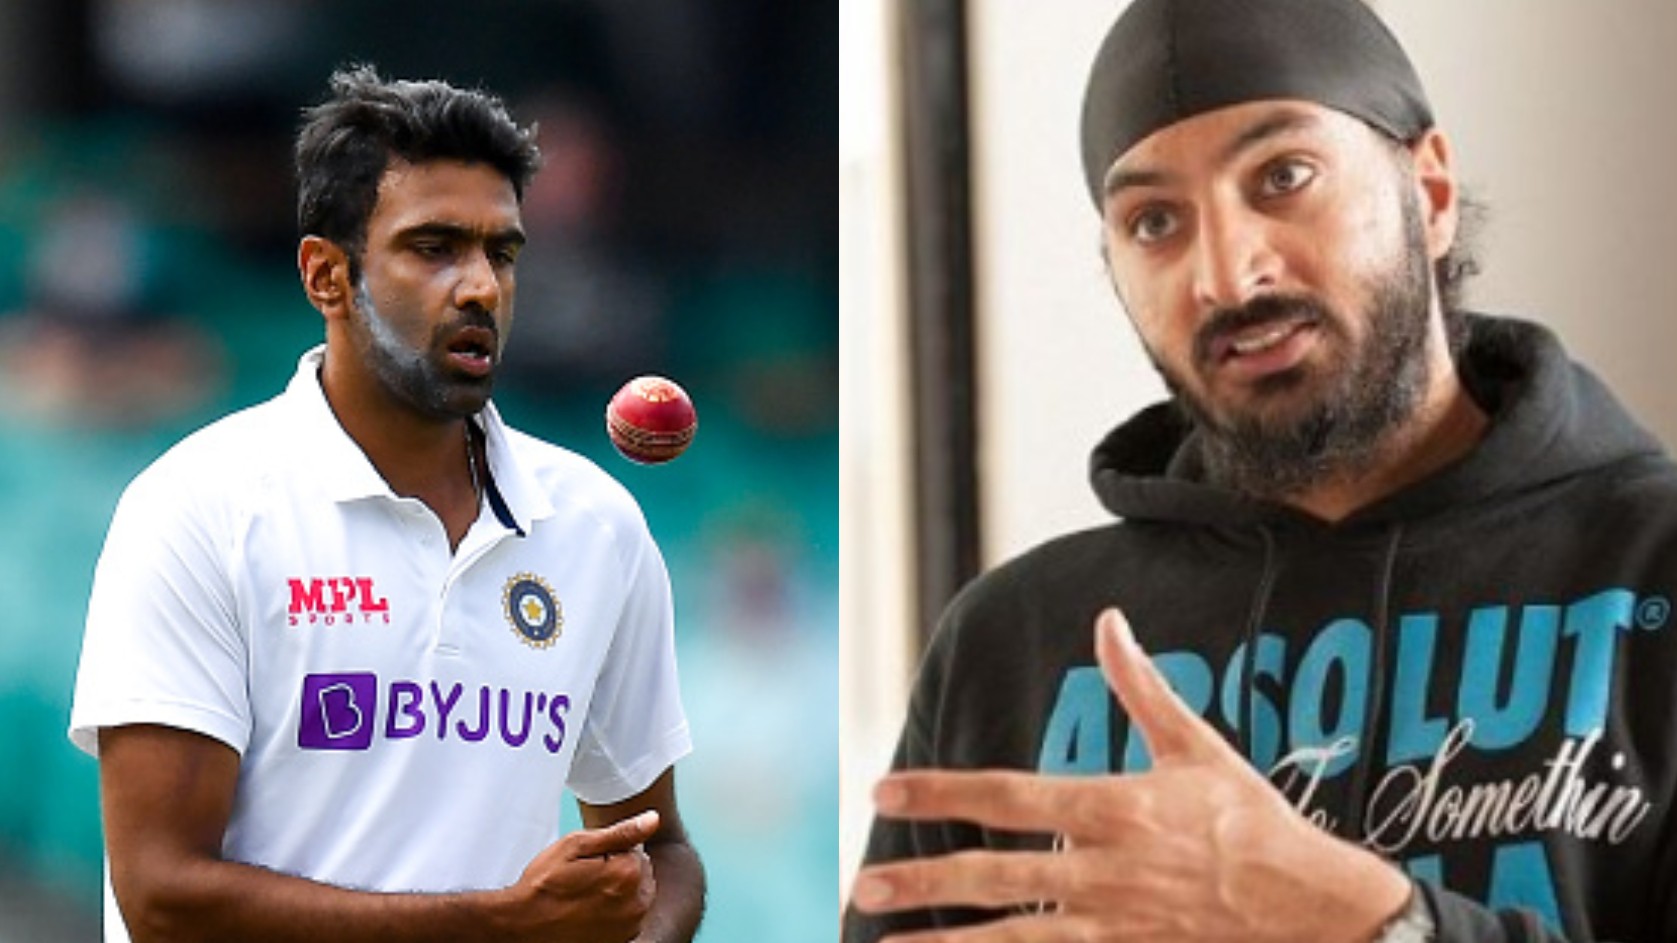 IND v ENG 2021: “Ashwin the key for India; Root needs to bat well for England to win” - Monty Panesar